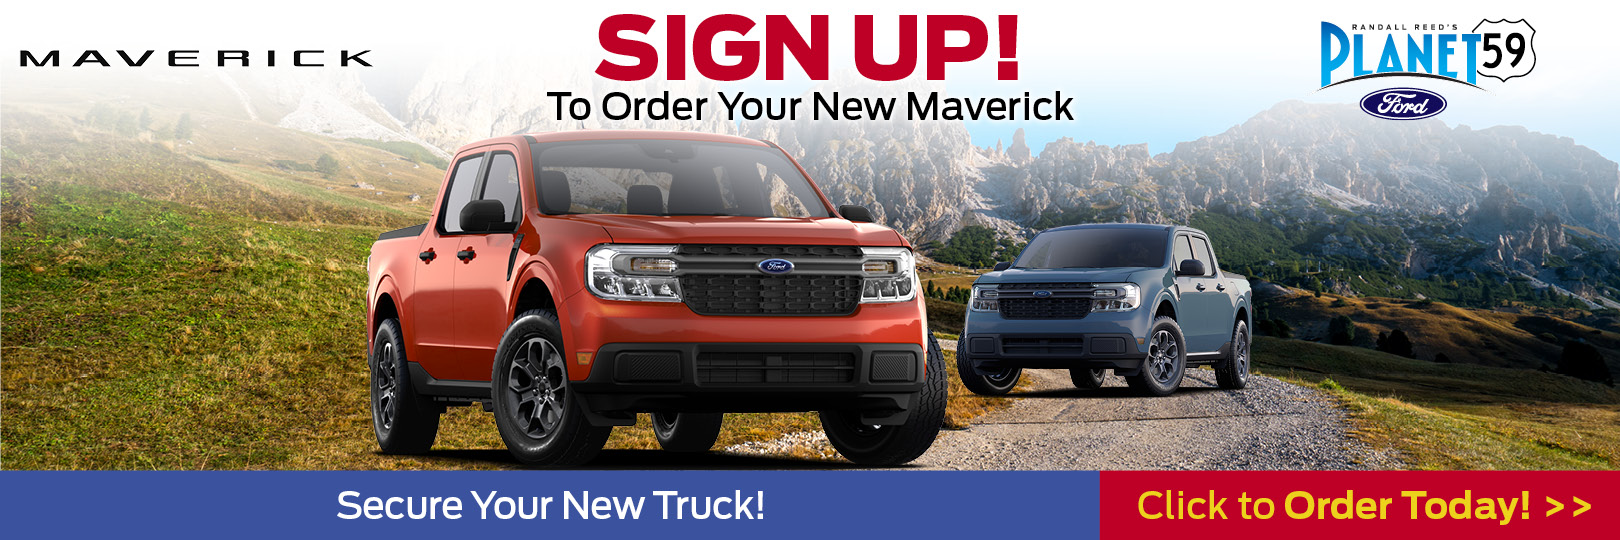 Reserve the Ford Maverick Today!